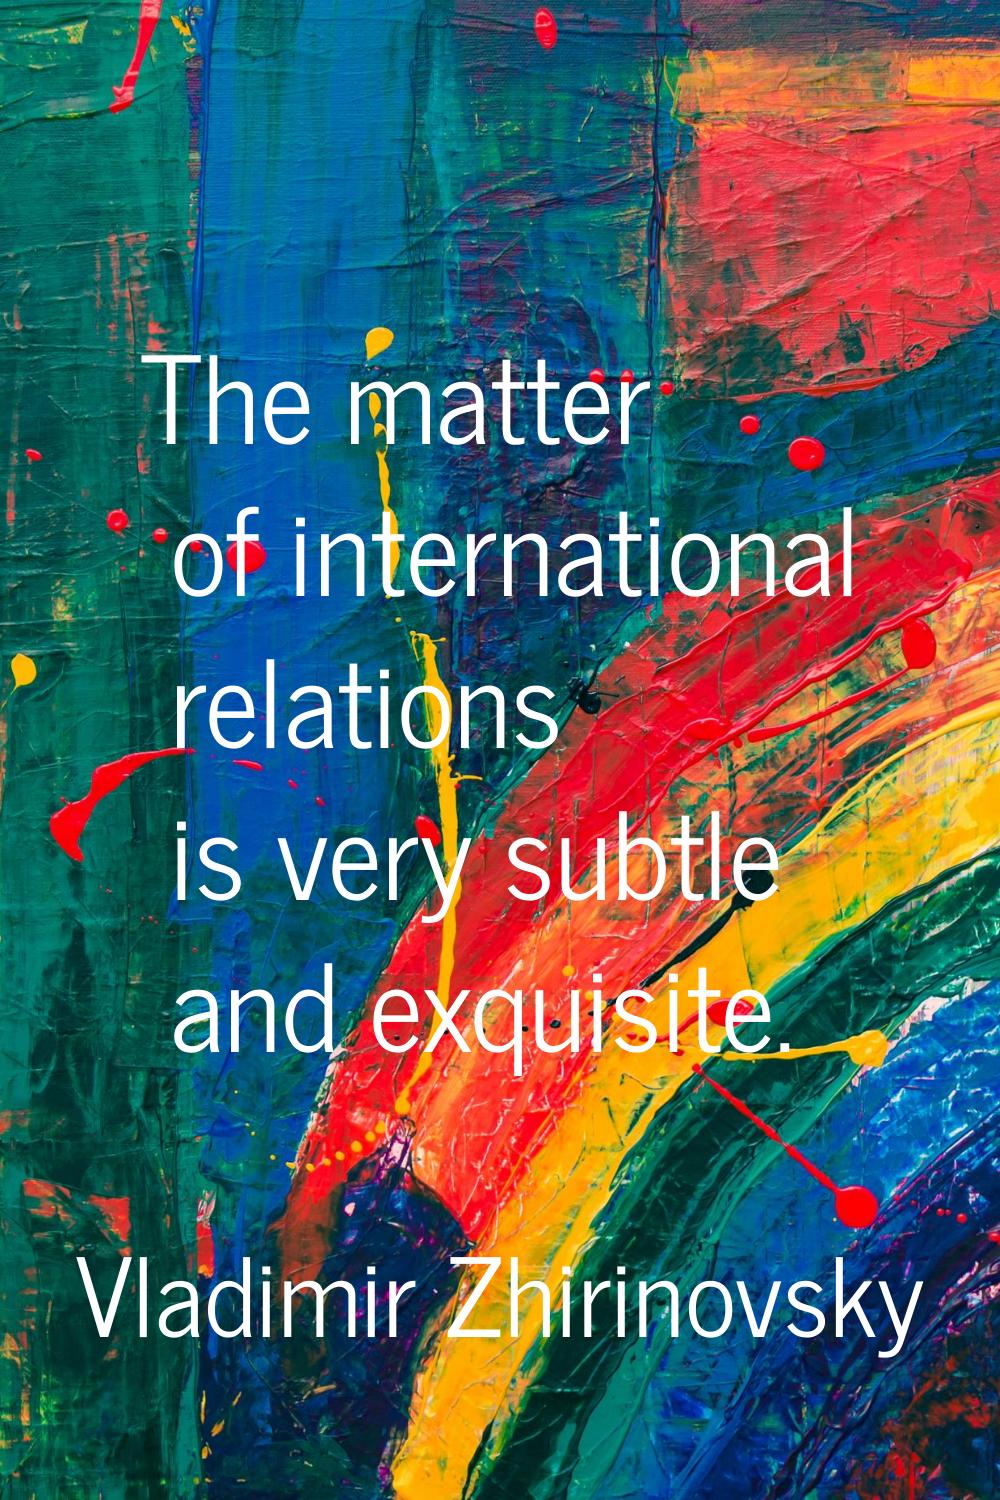 The matter of international relations is very subtle and exquisite.